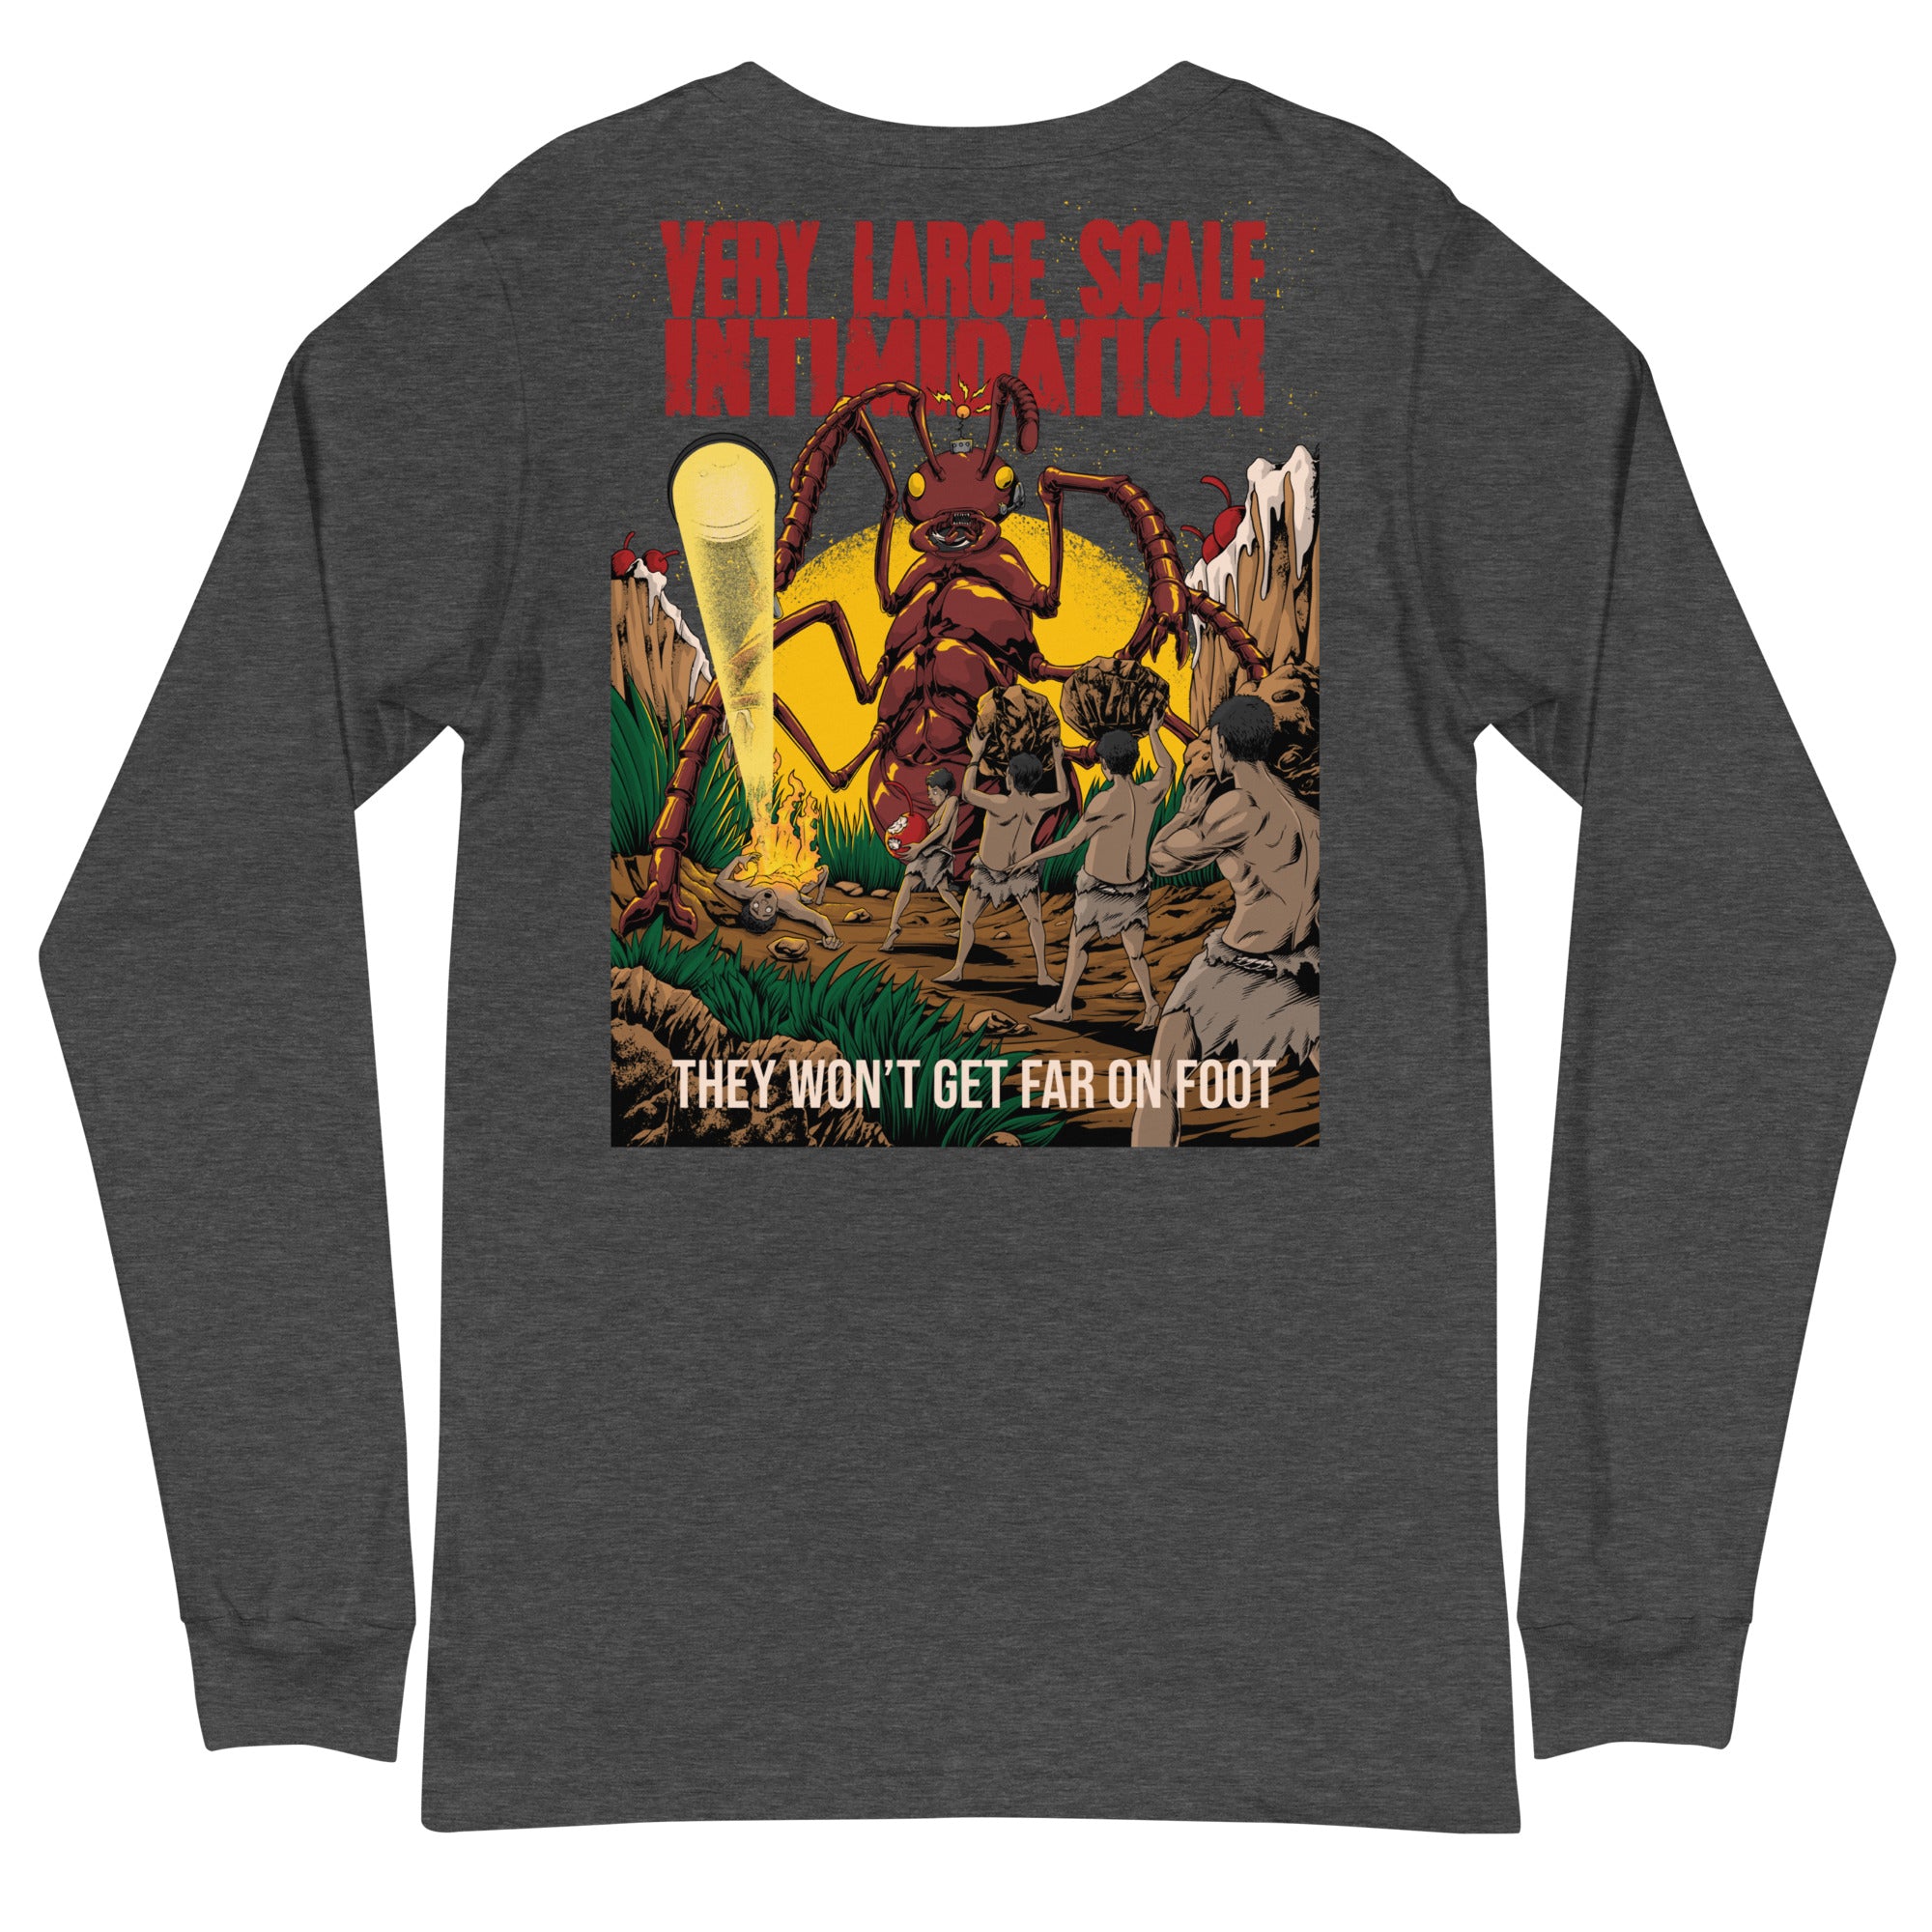 Very Large Scale Intimidation Long Sleeve Band Tee